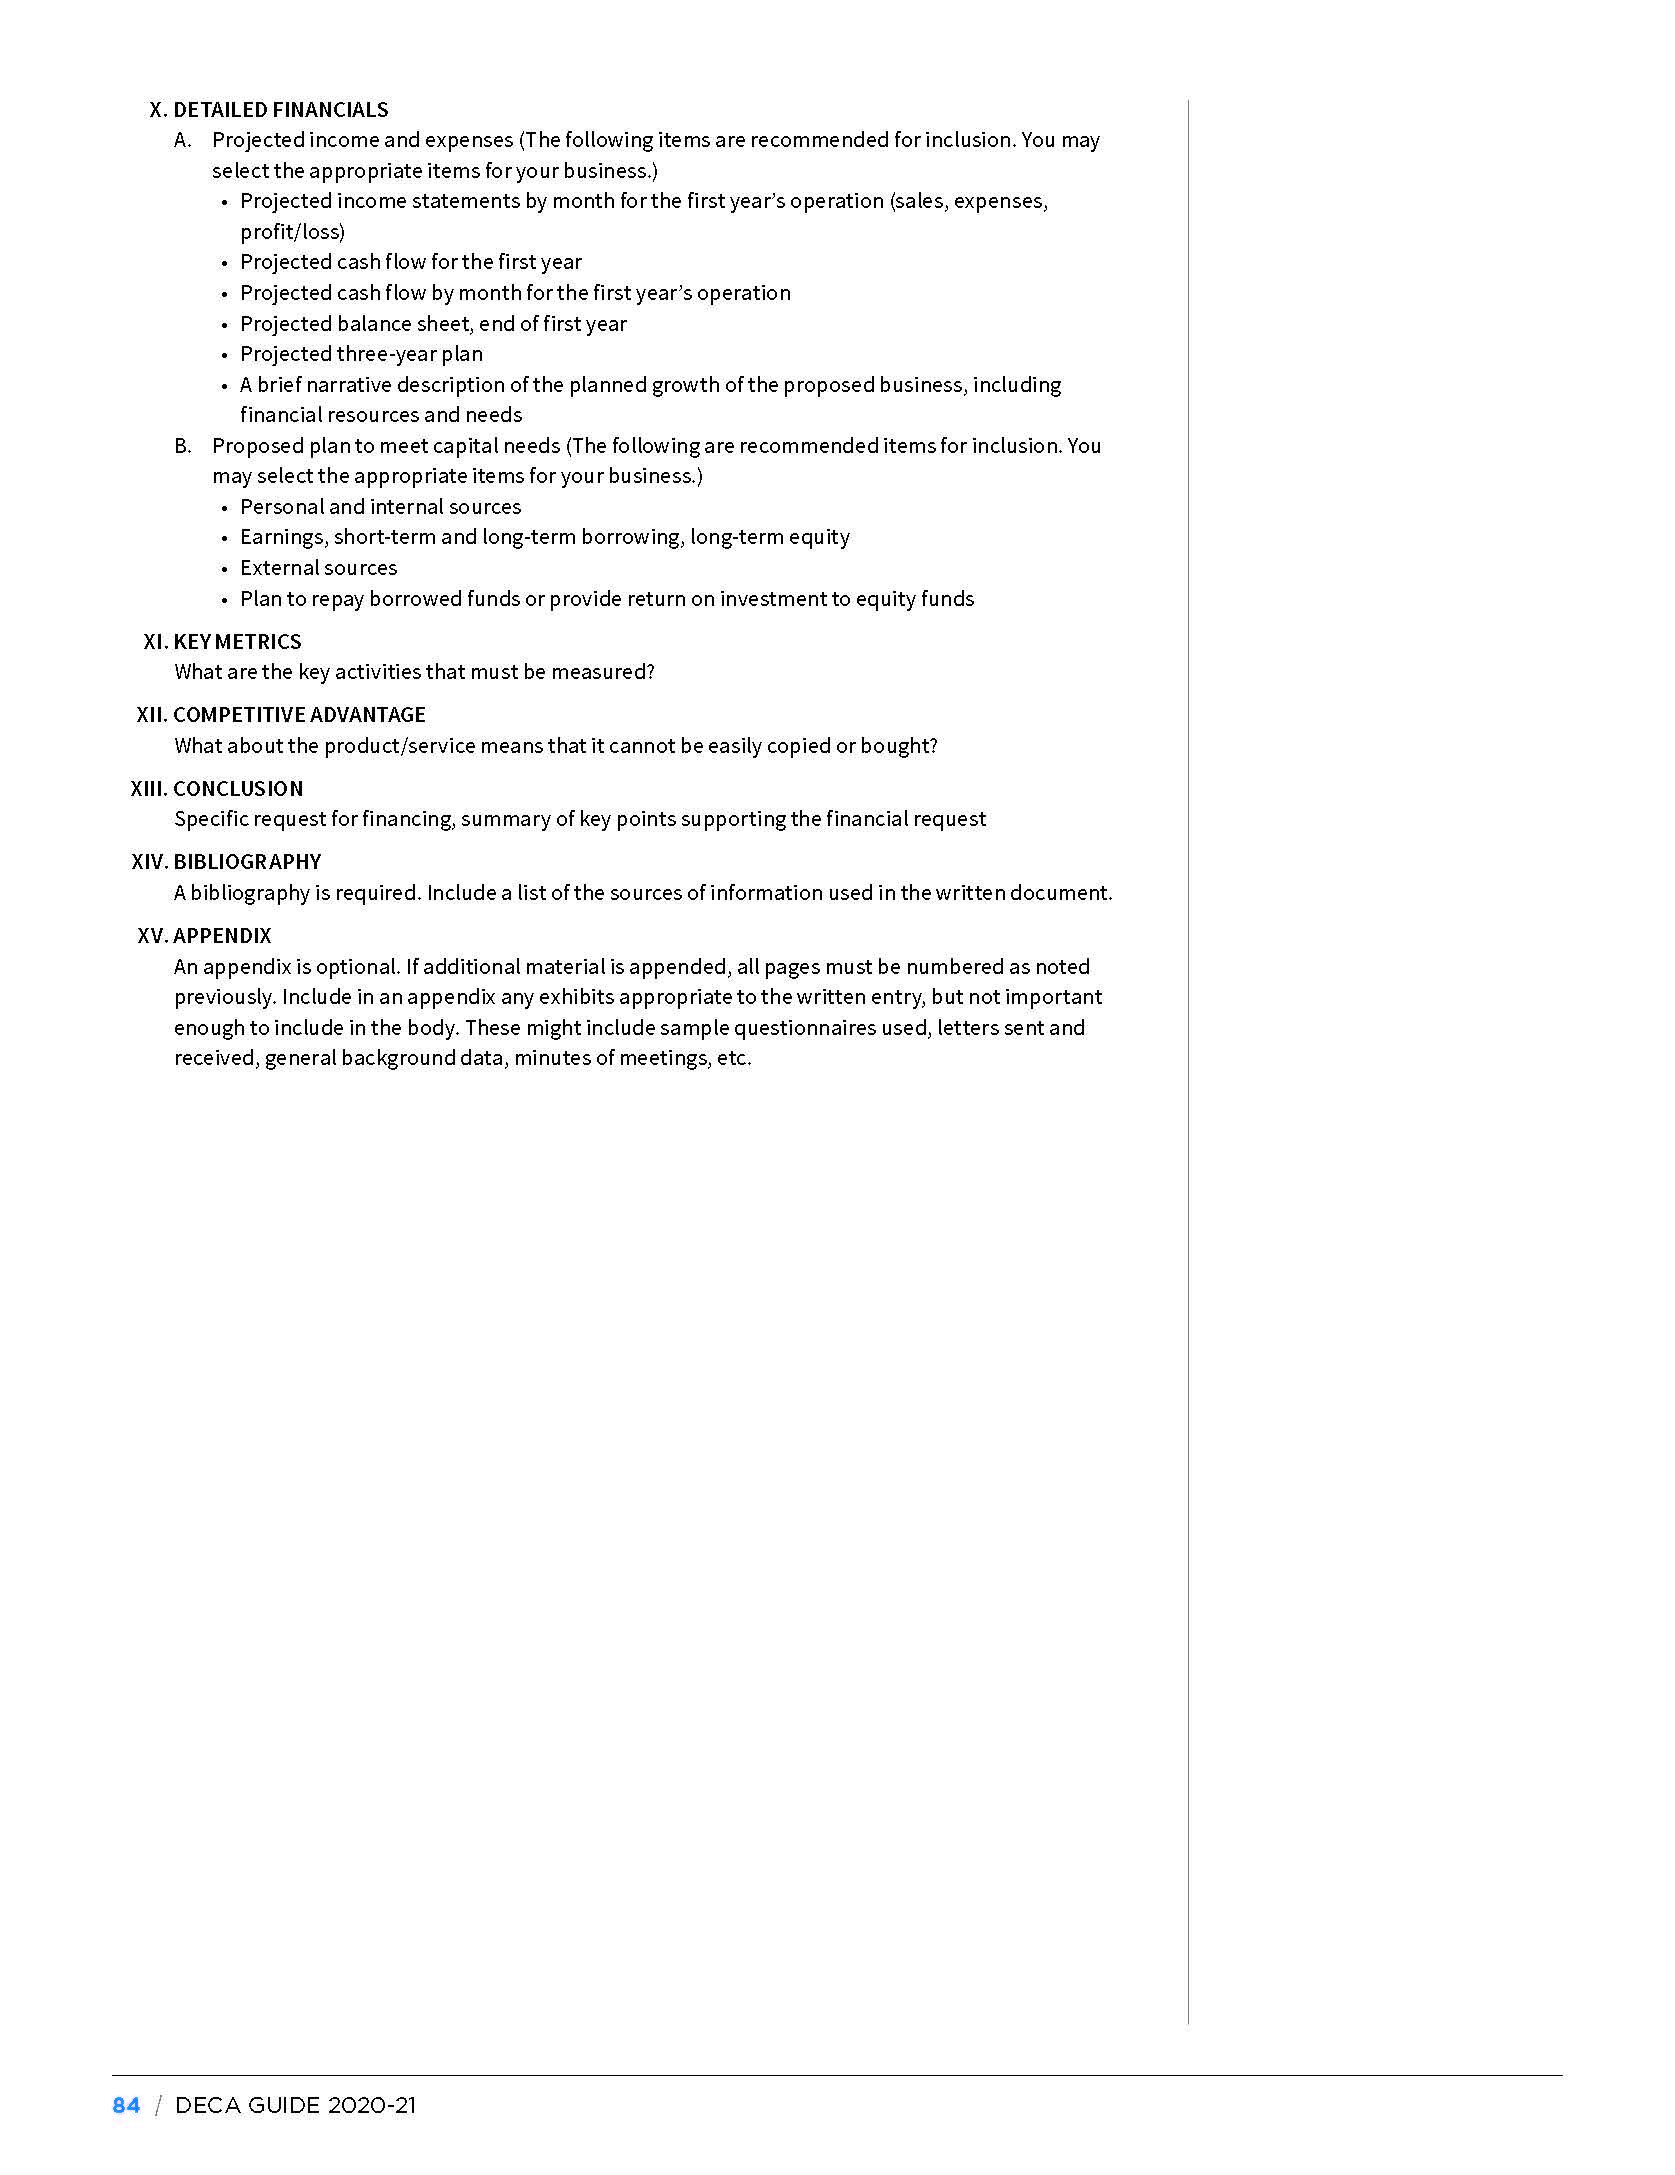 DECA-2020-HS-Guide_Page_086.jpg